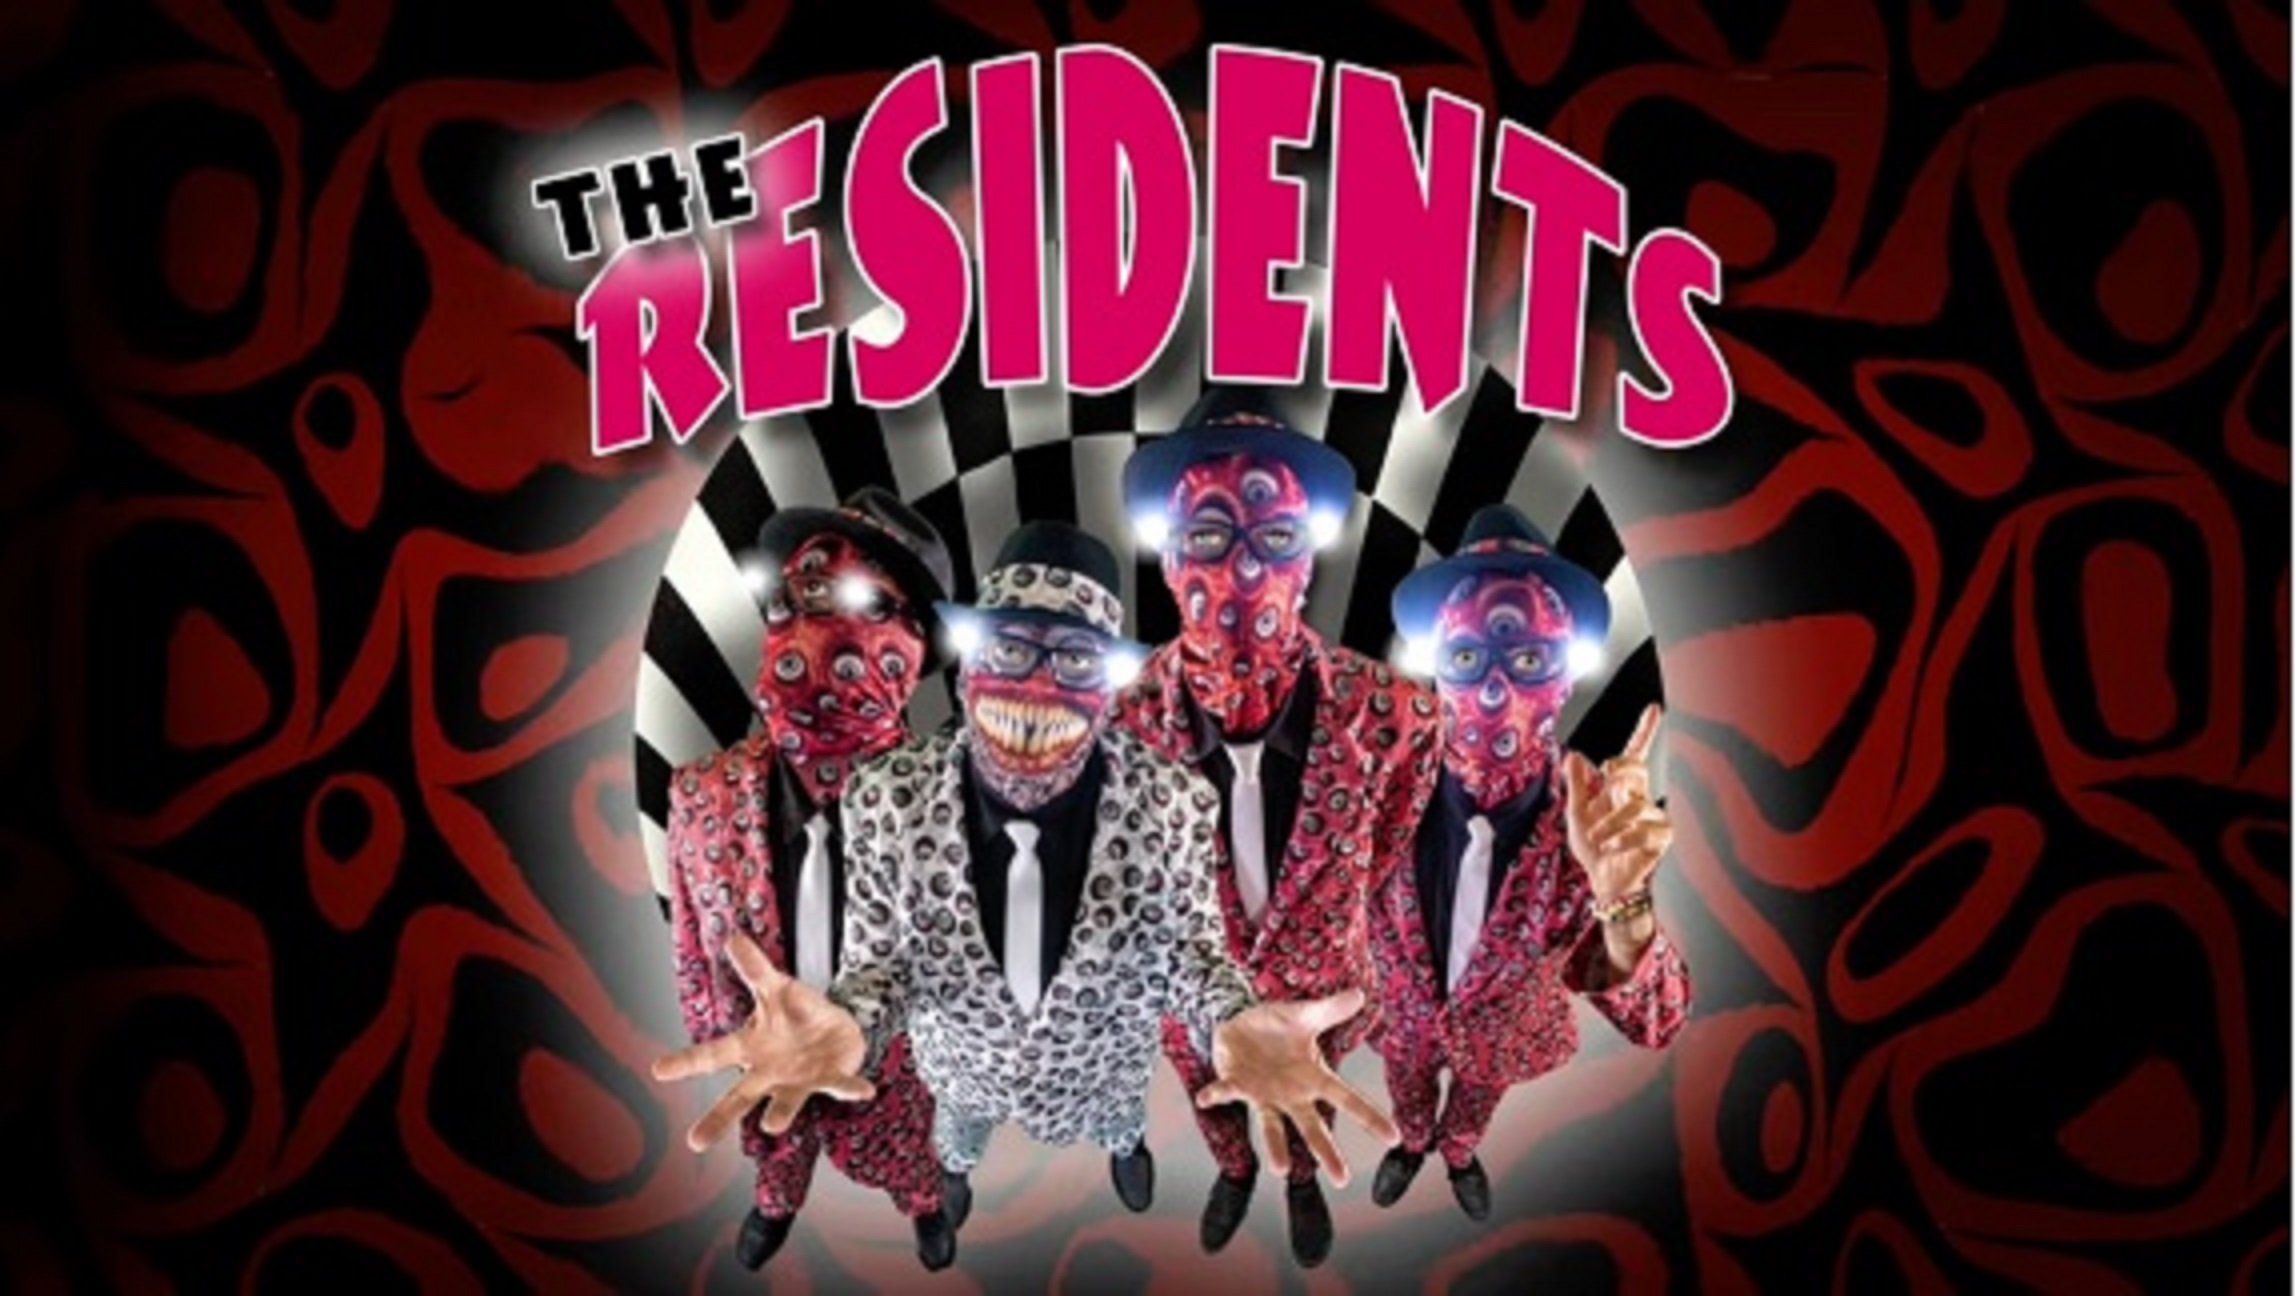 FACELESS FOREVER The Residents' 50th Anniversary Tour